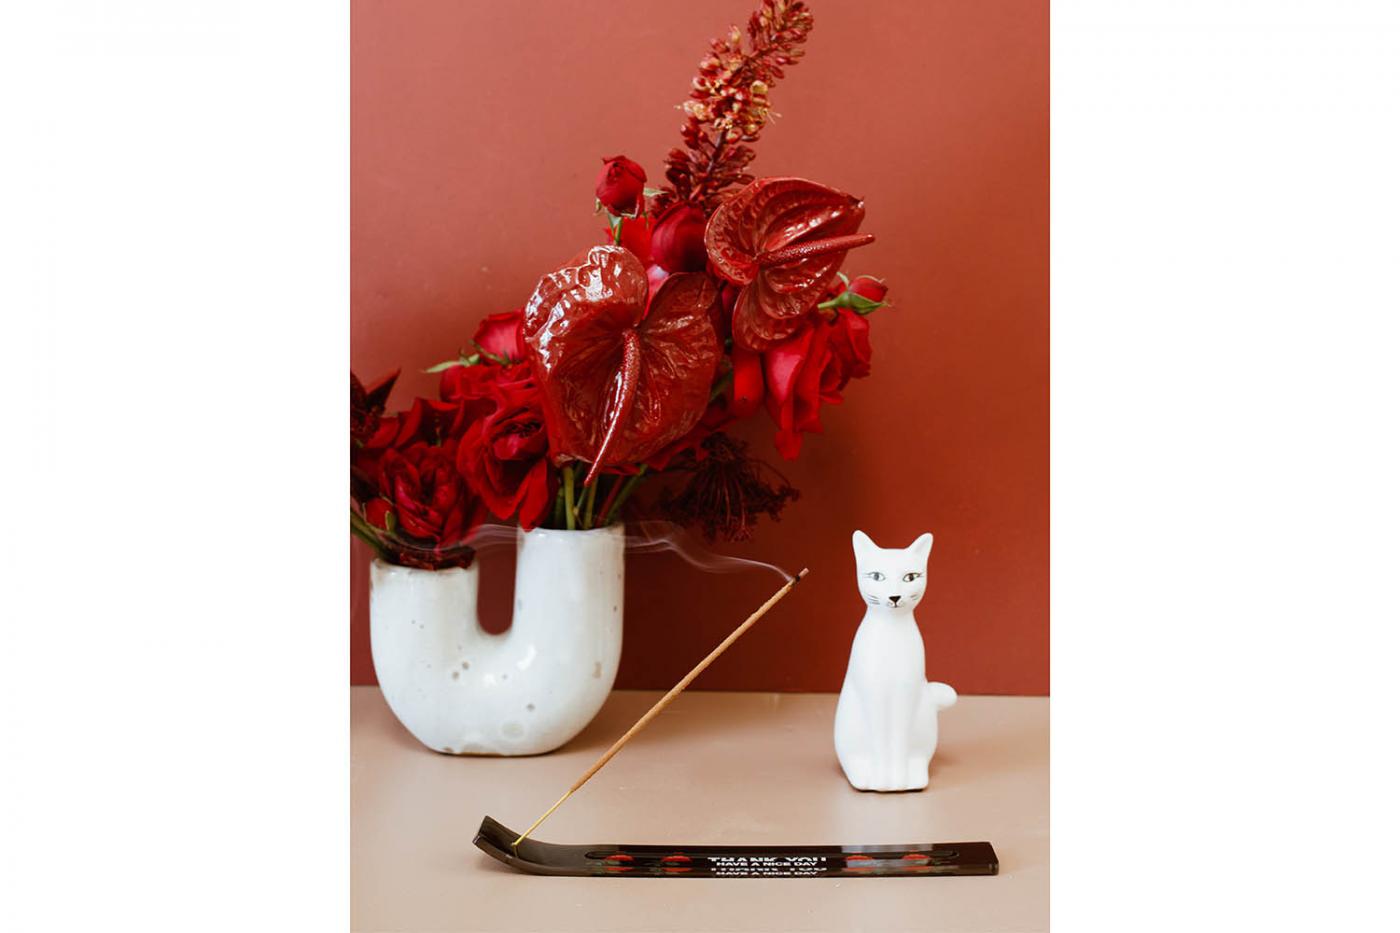 incense burning, cat statue and red florals sitting on table